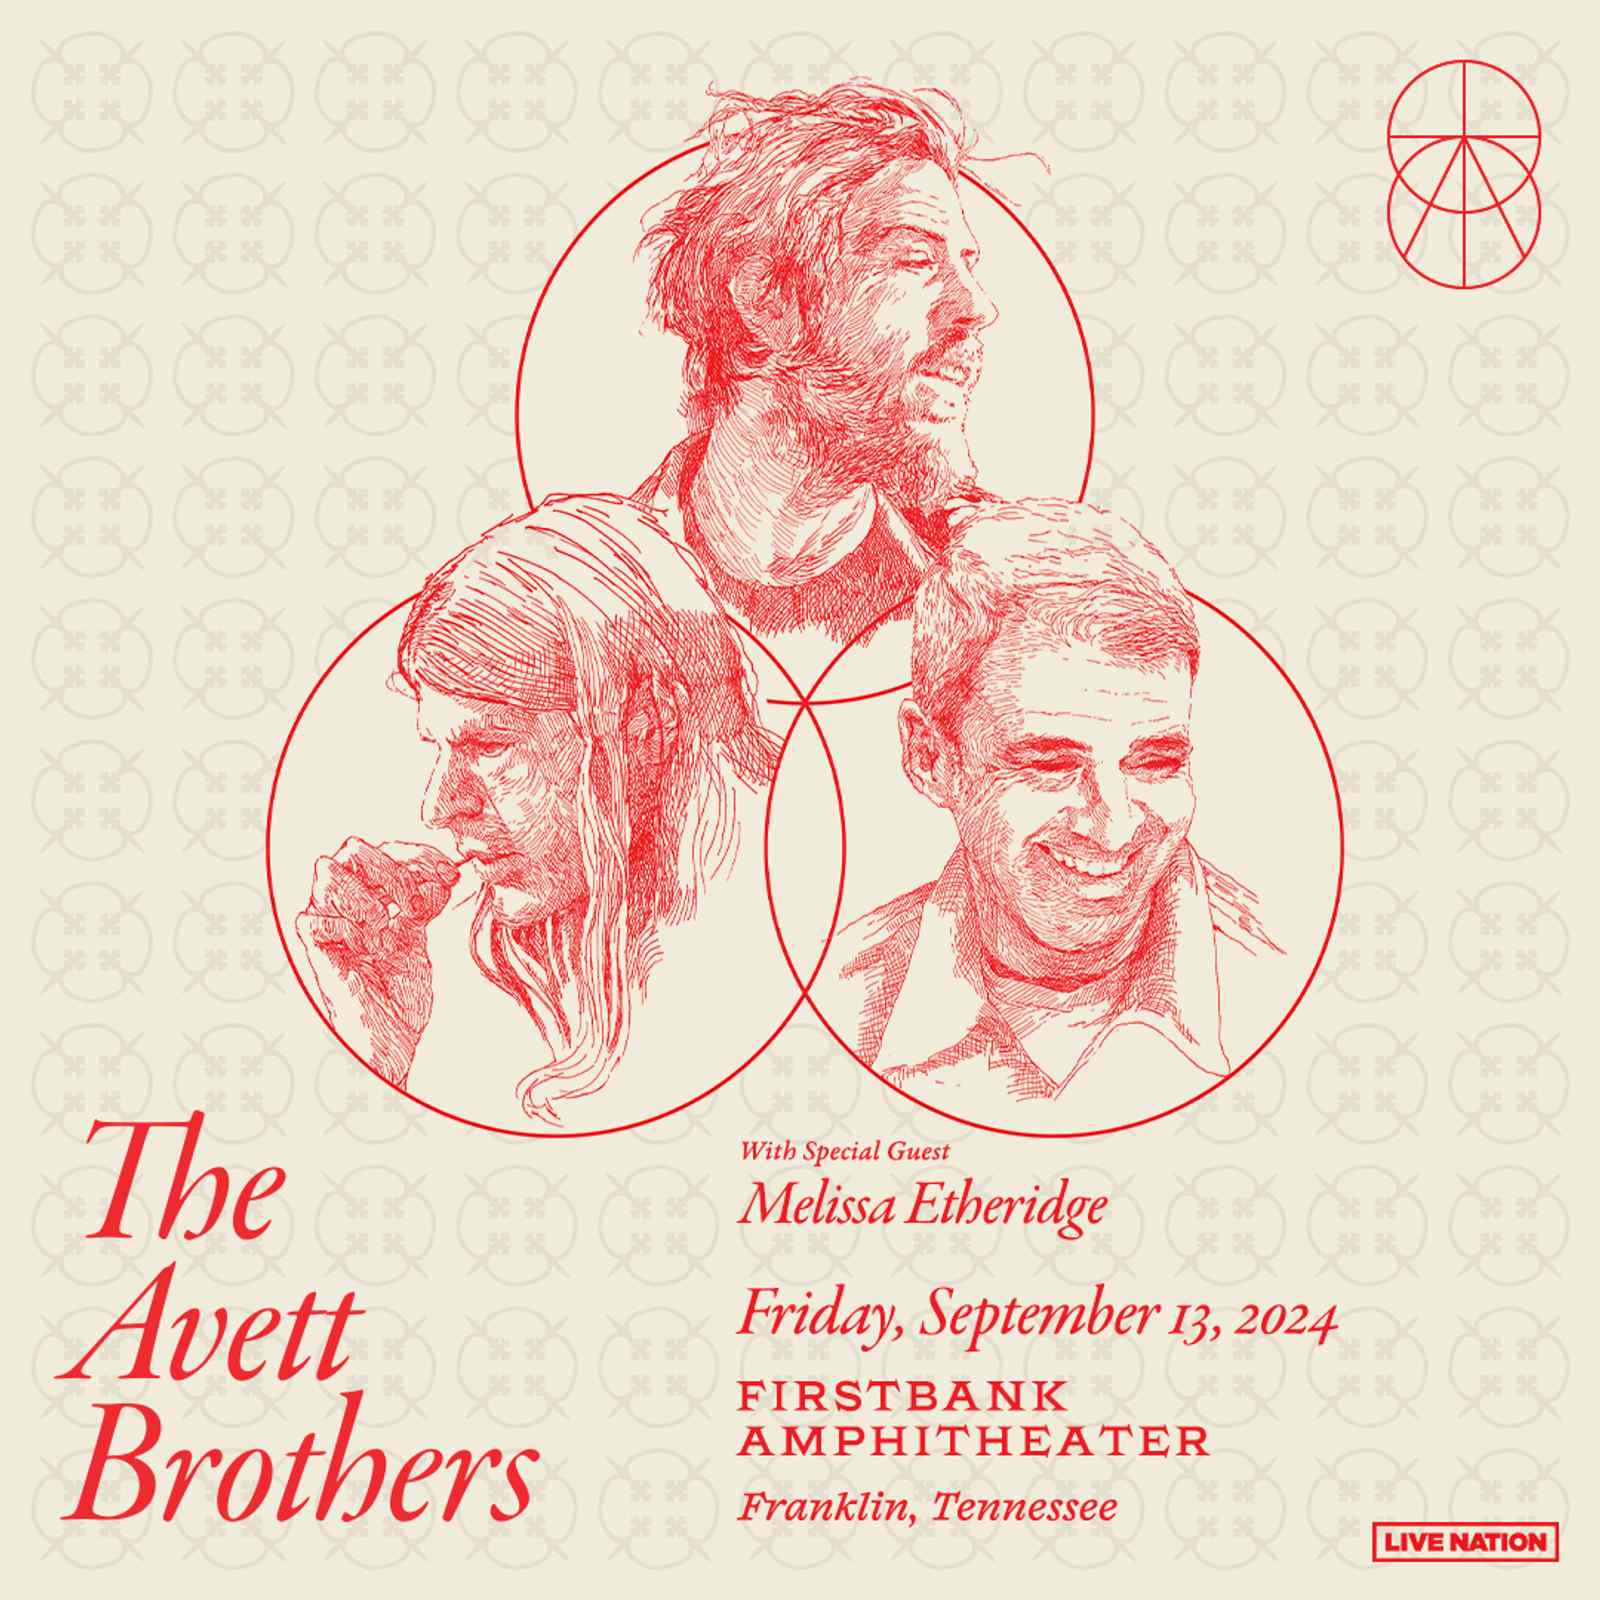 The Avett Brothers with special guest Melissa Etheridge - 7:30 PM